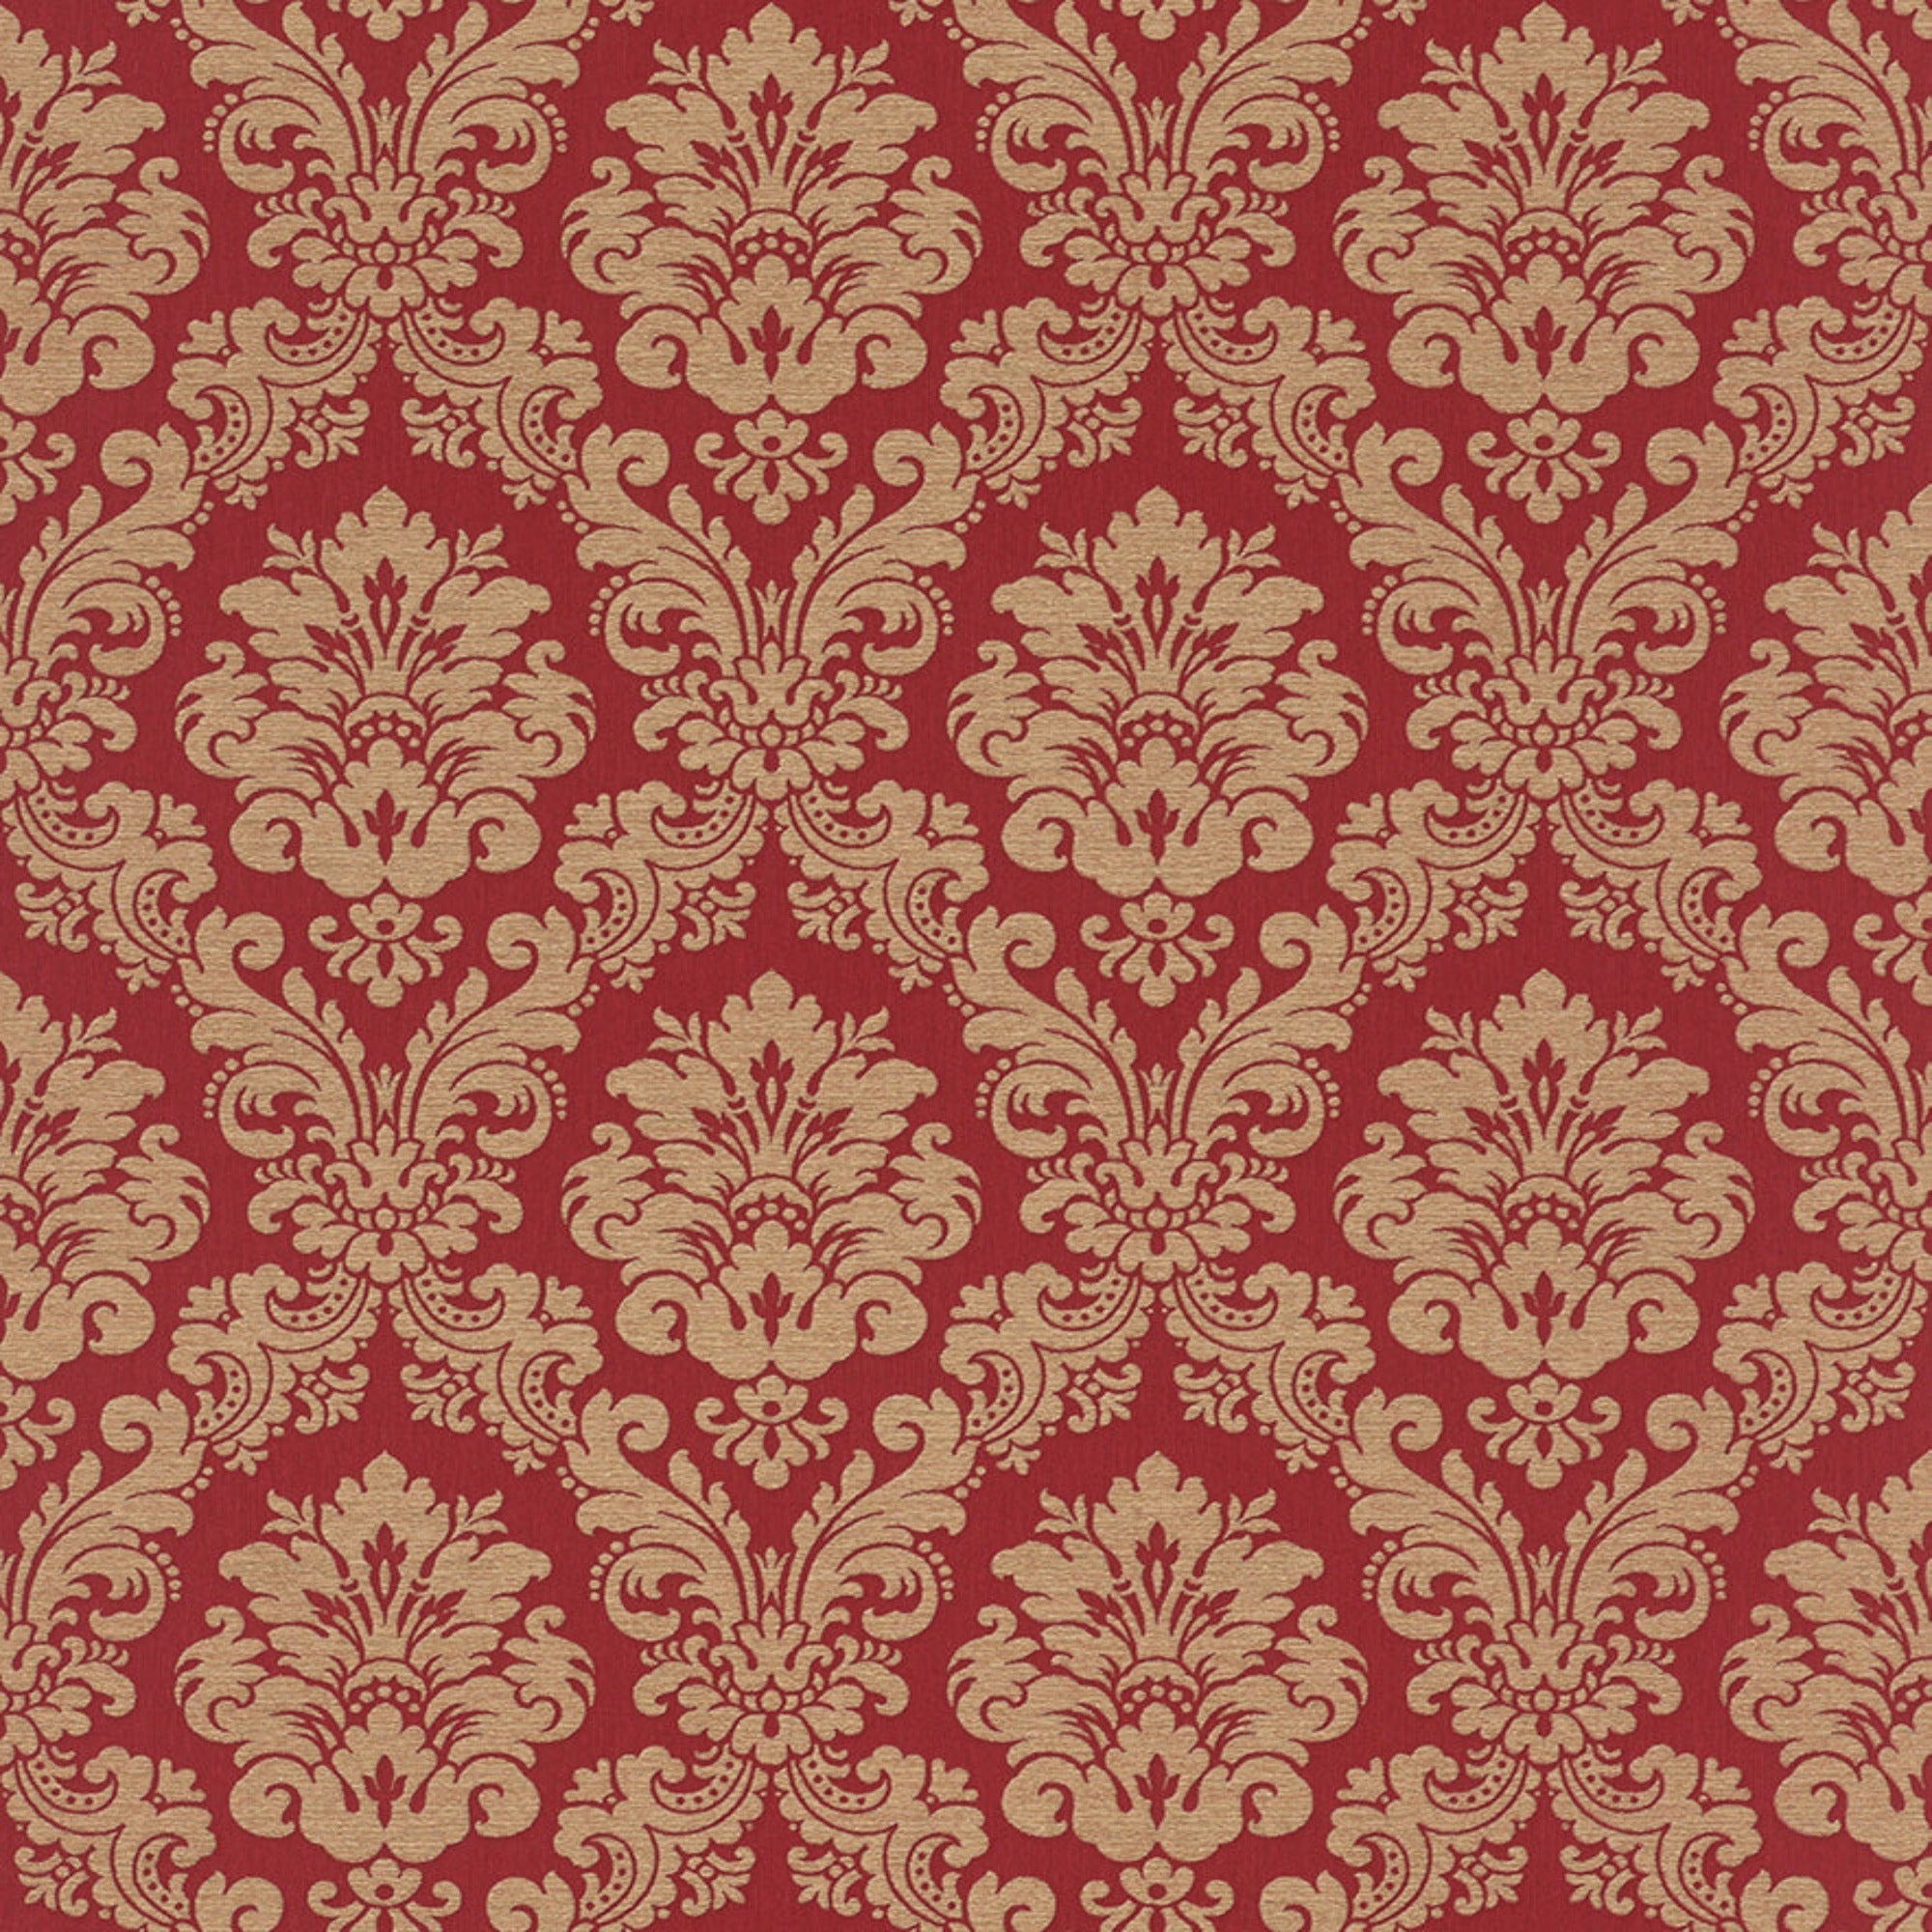 Trianon Damask Red / Gold | WonderWall by Nobletts